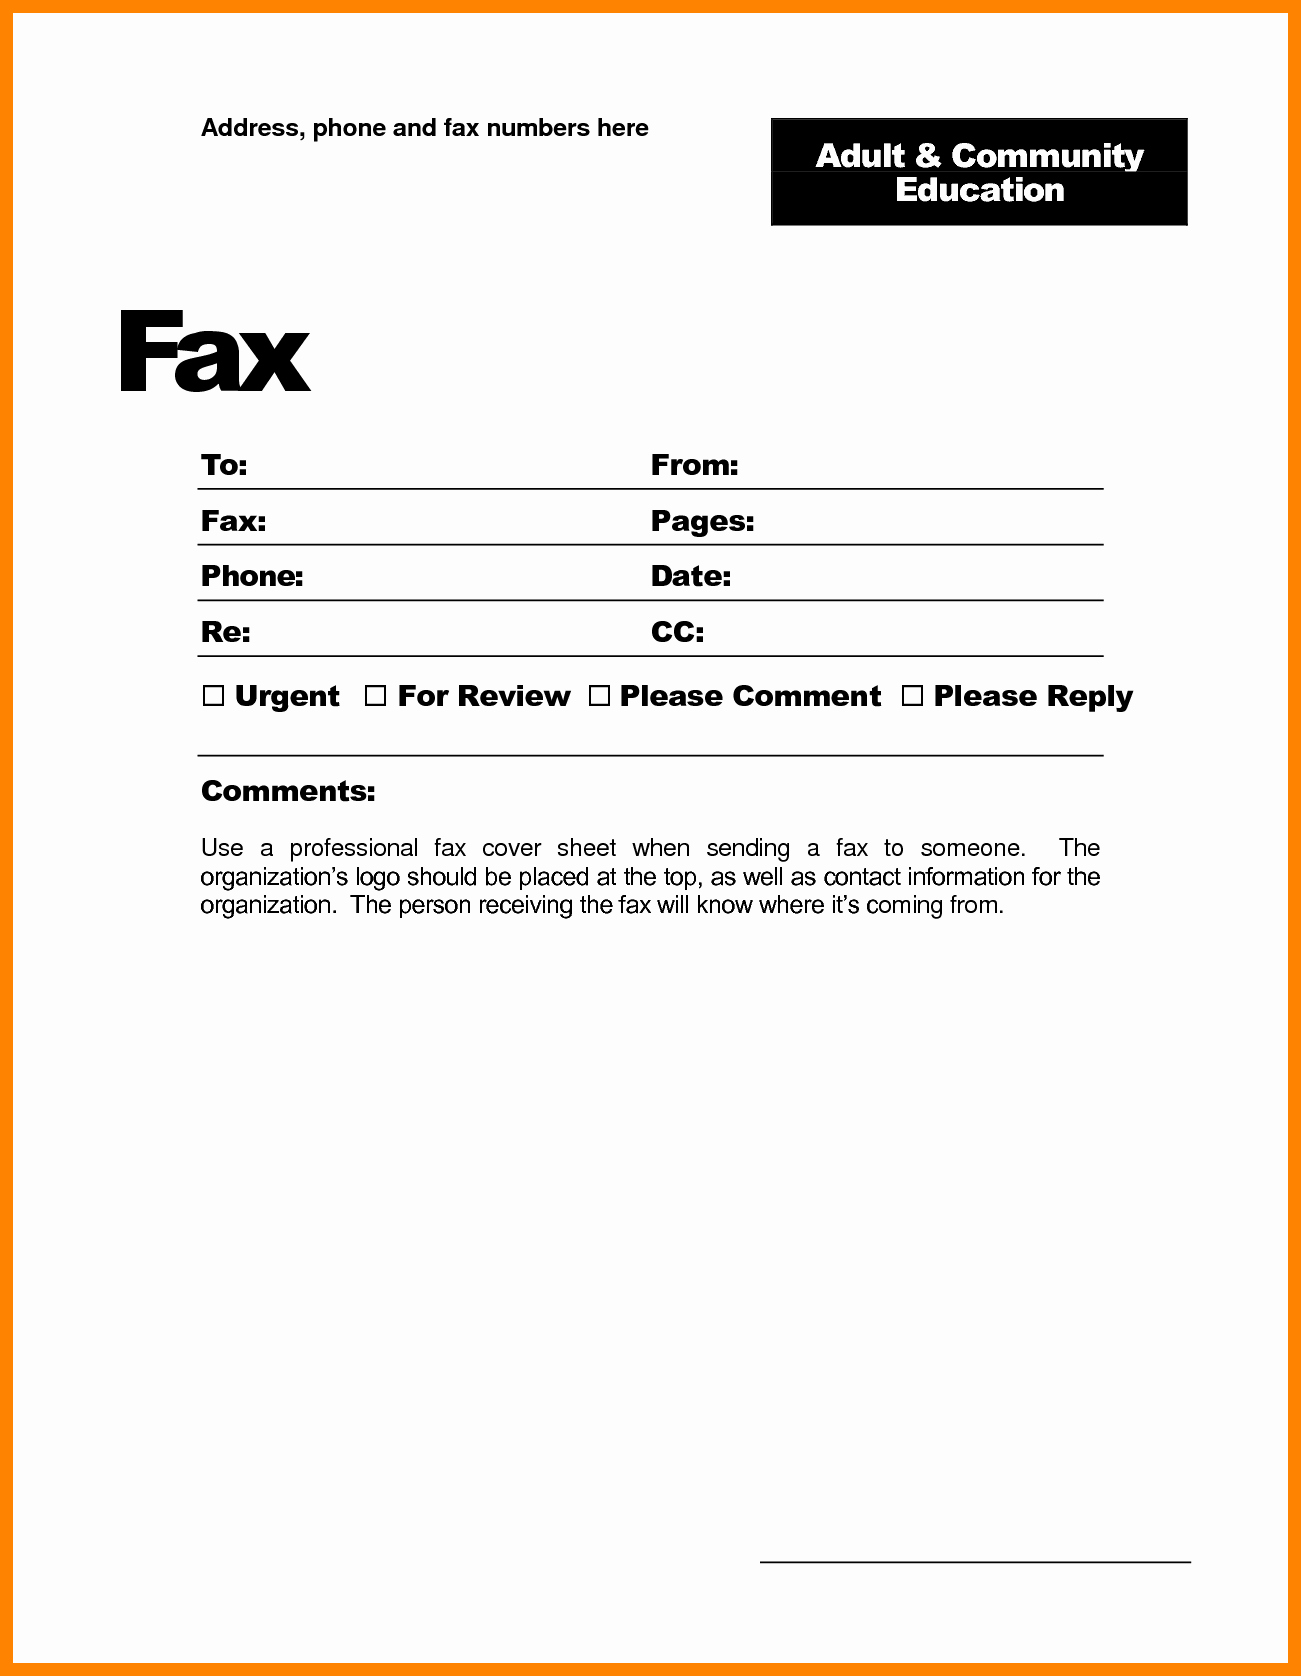 Free Fax Cover Sheet Templates Luxury Fax Cover Template Word Portablegasgrillweber